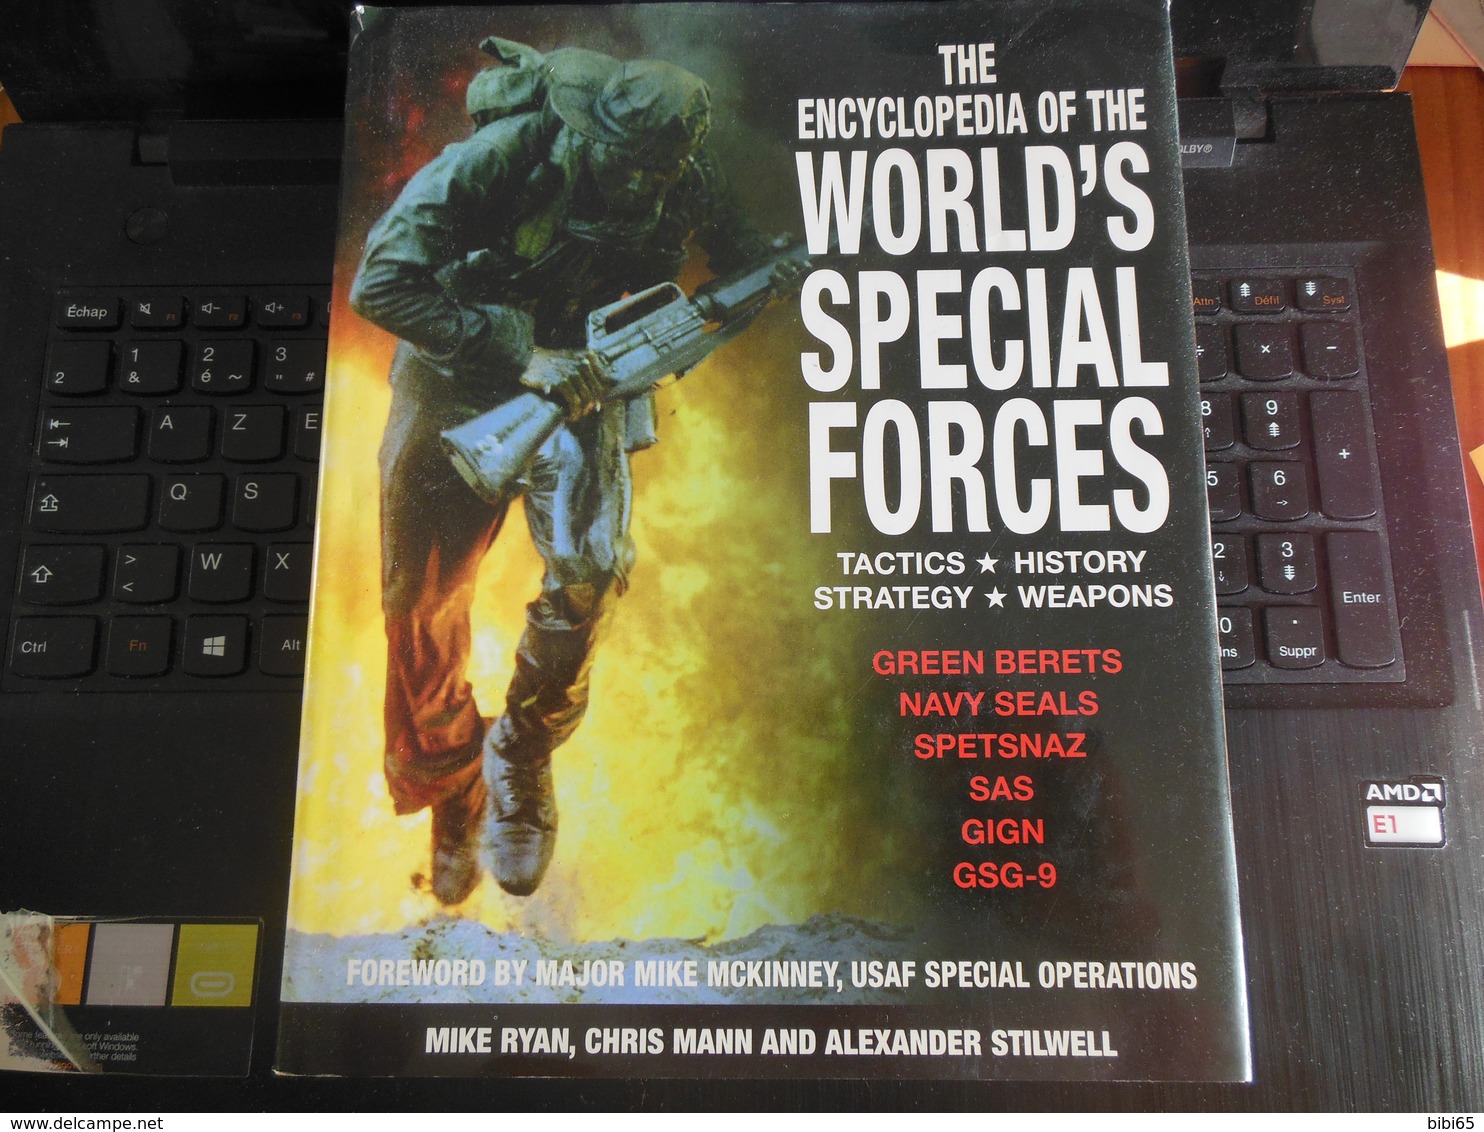 THE ENCYCLOPEDIA OF THE WORLD'S SPECIAL FORCES TACTICS HISTORY STRATEGY WEAPONS GREEN BERETS NAVY SEALS SPETSNAZ SAS - Foreign Armies